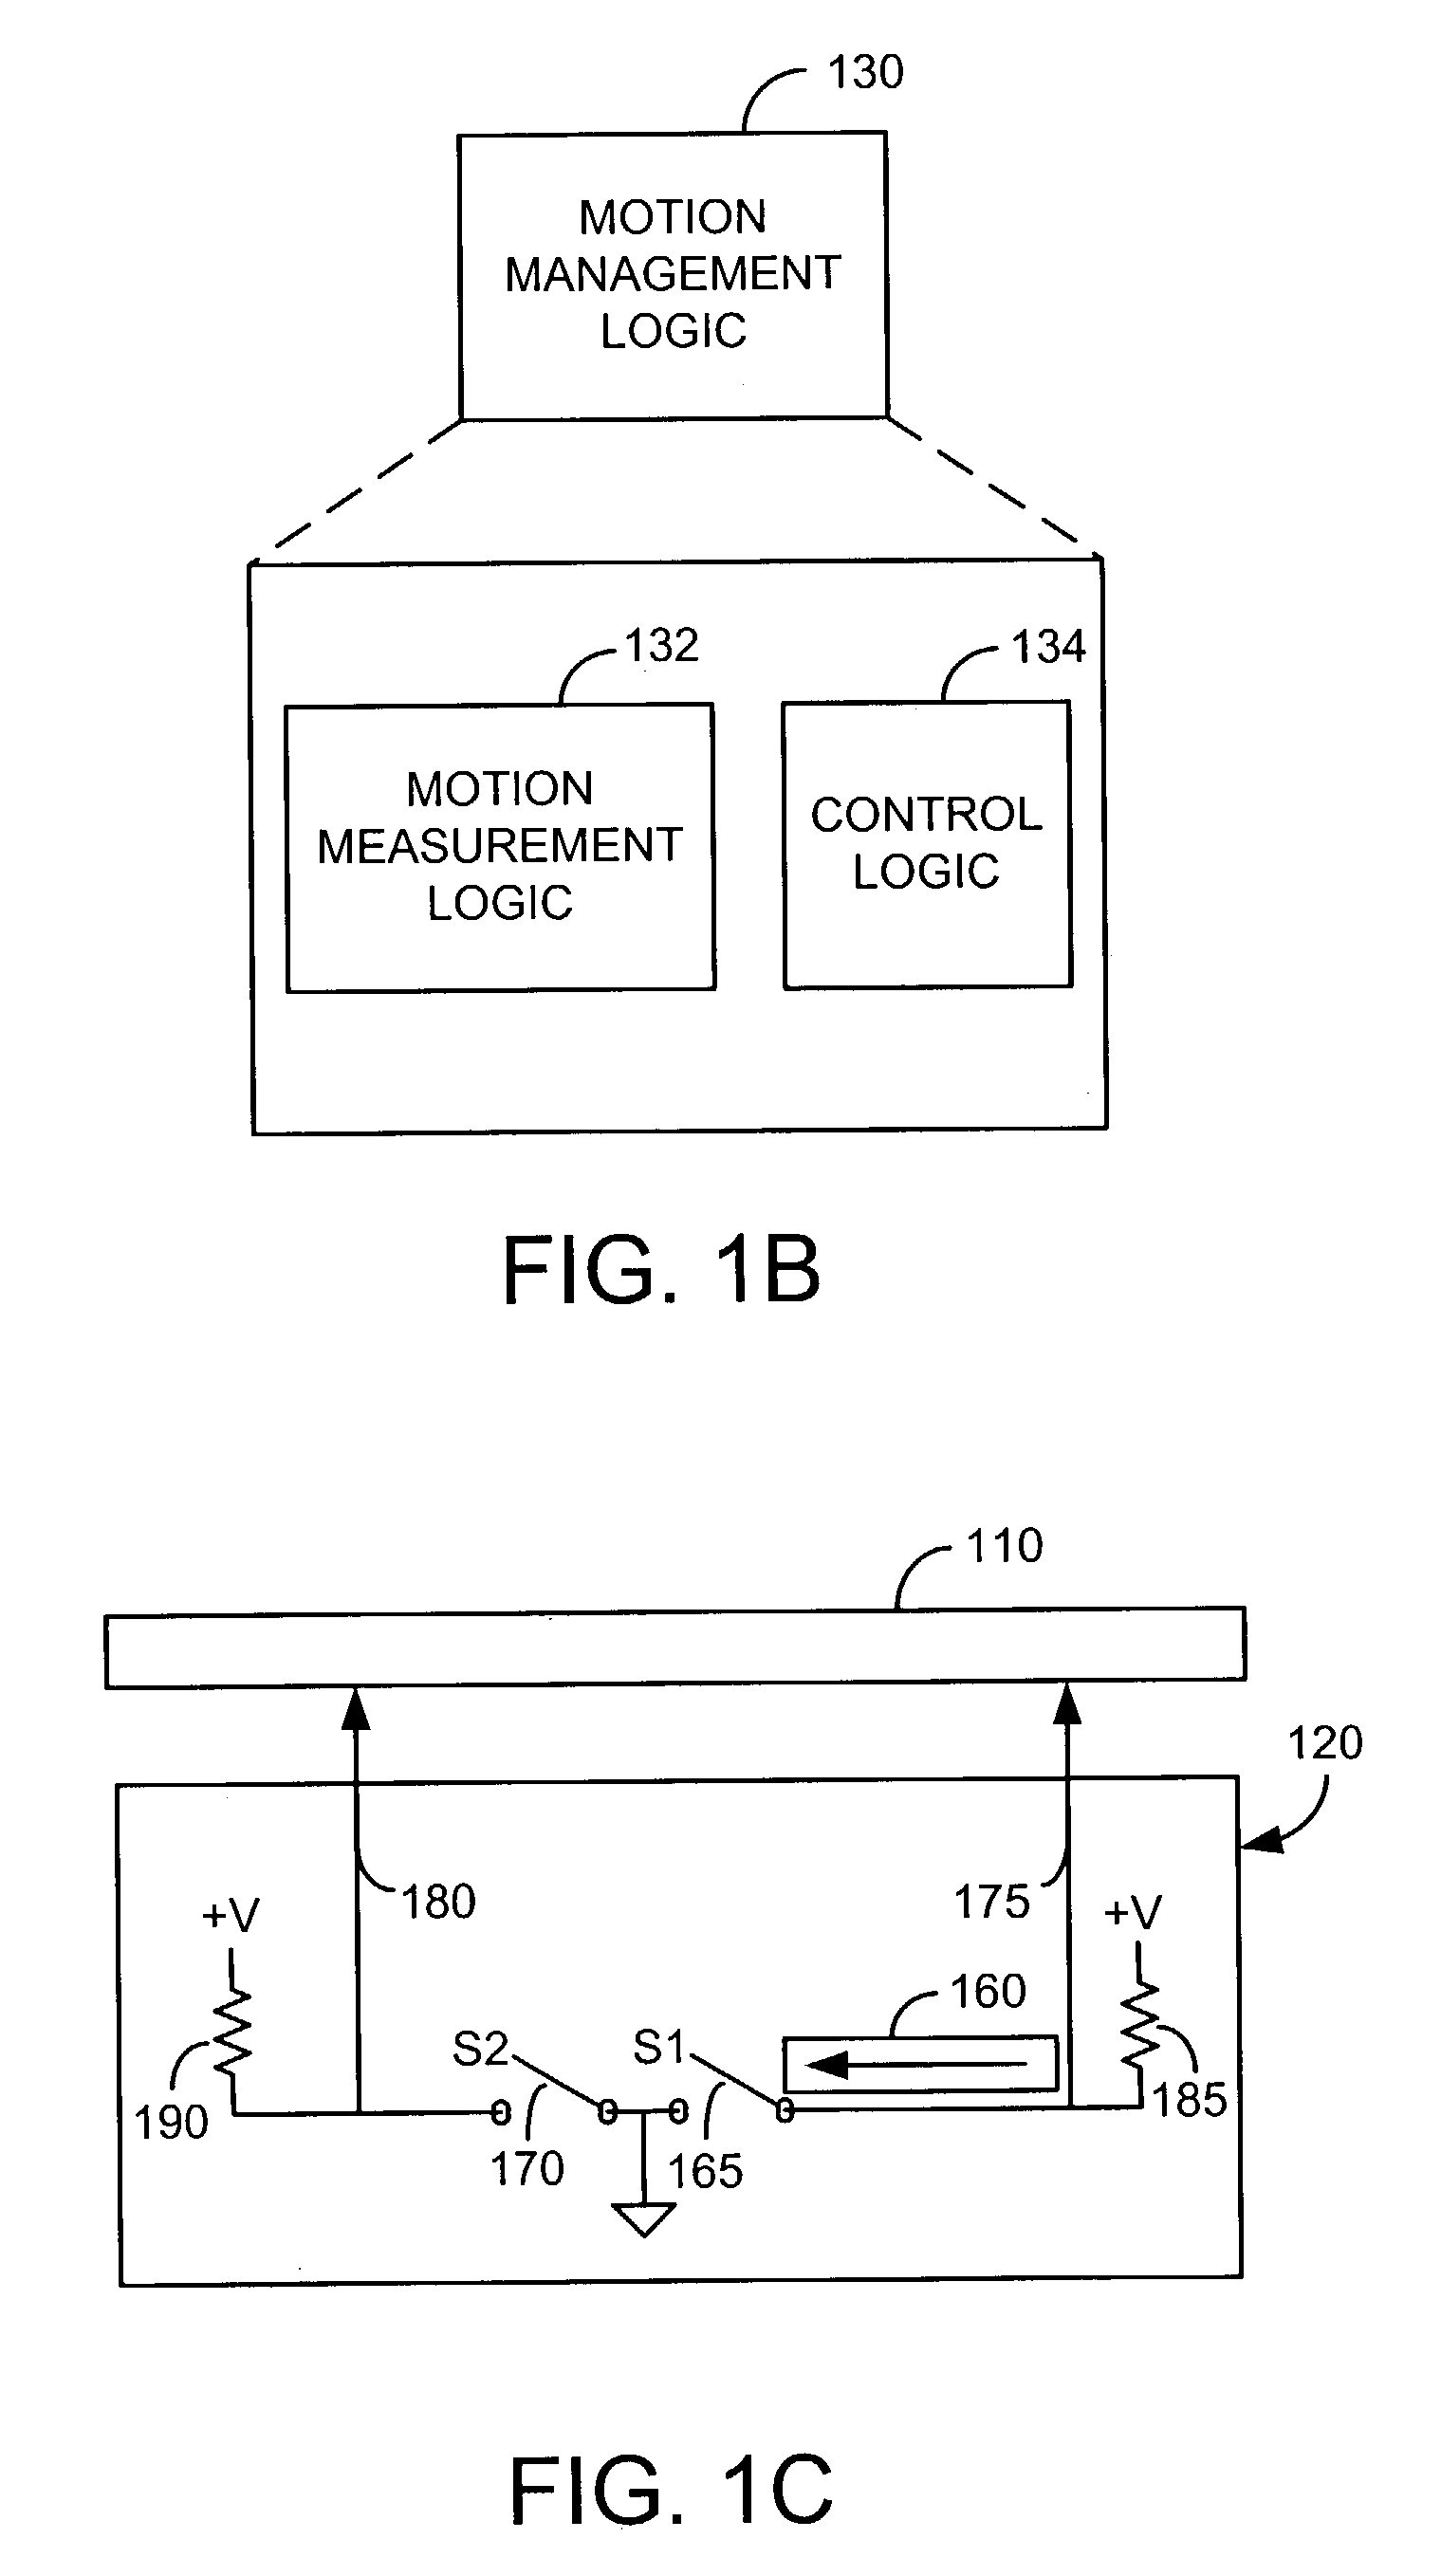 Digital camera having a motion tracking subsystem responsive to input control for tracking motion of the digital camera